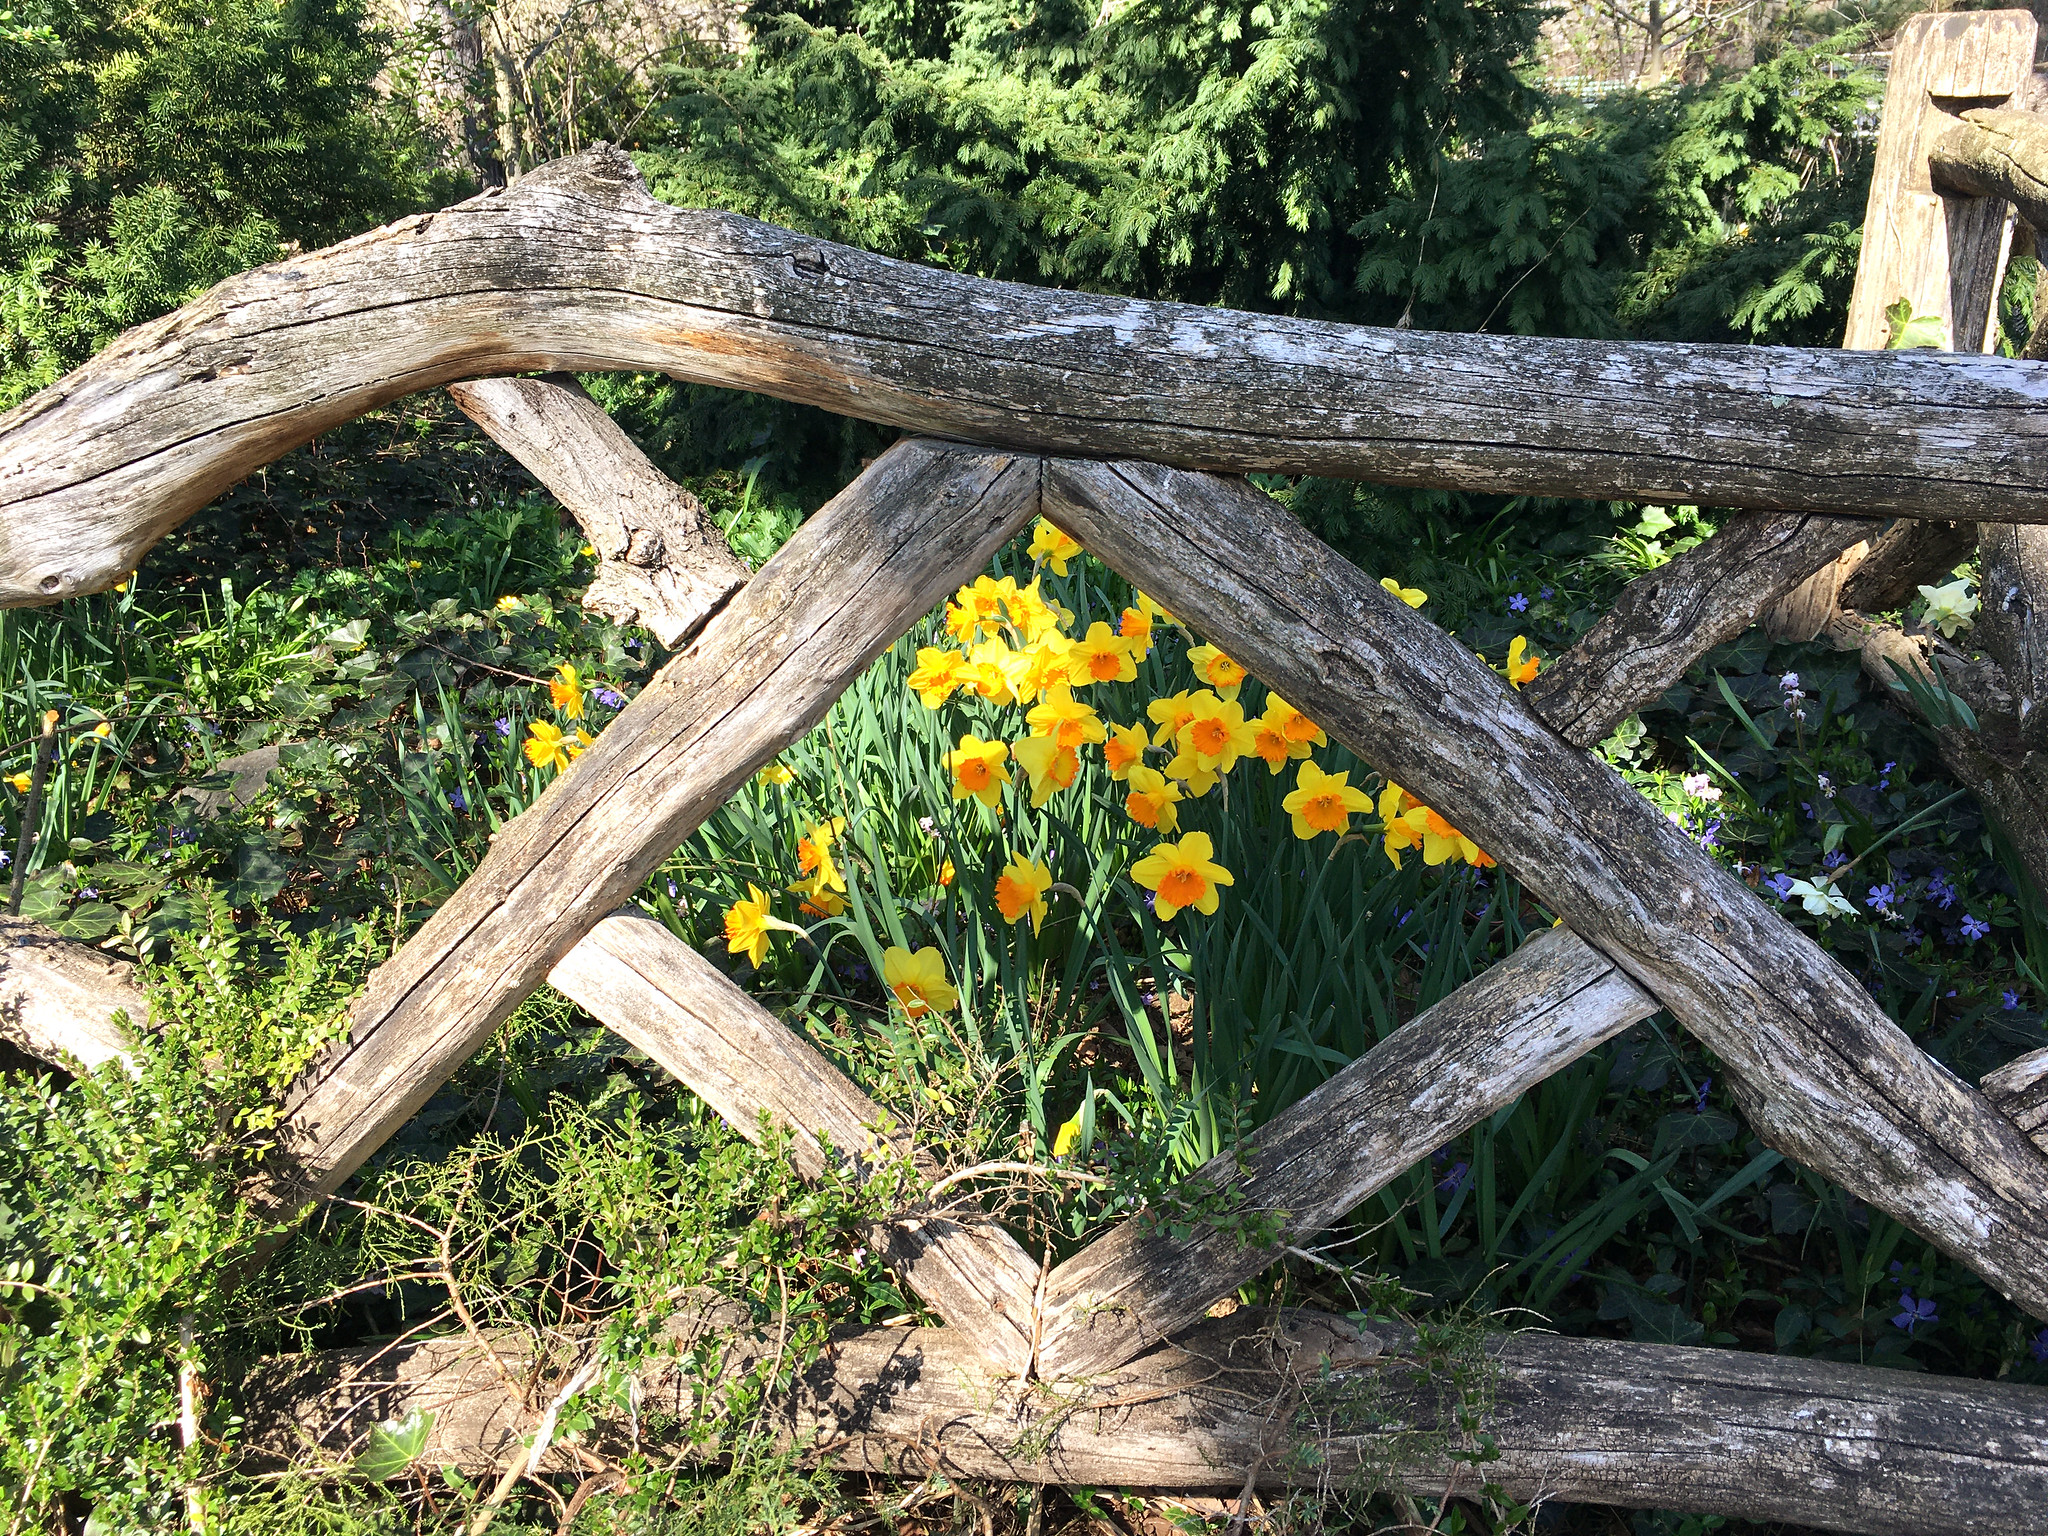 Daffodils seen through a wooden fence in Central Park